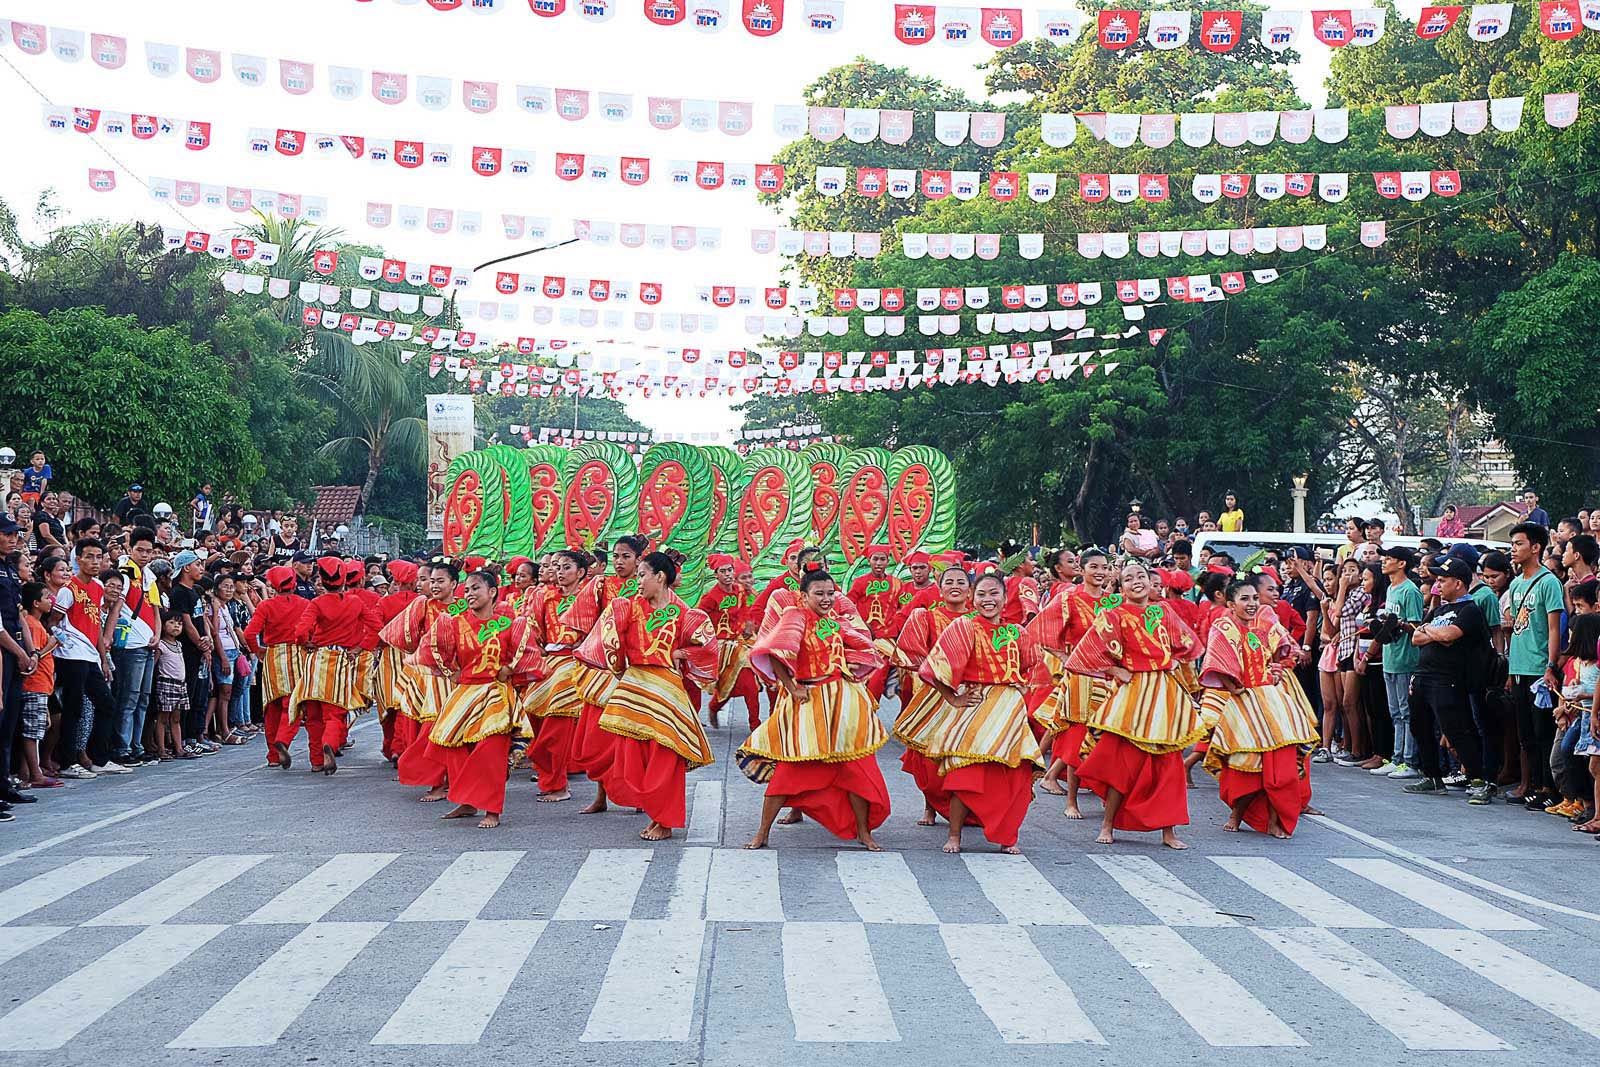 The Sandurot Festival 2017 brings the party to quiet Dumaguete